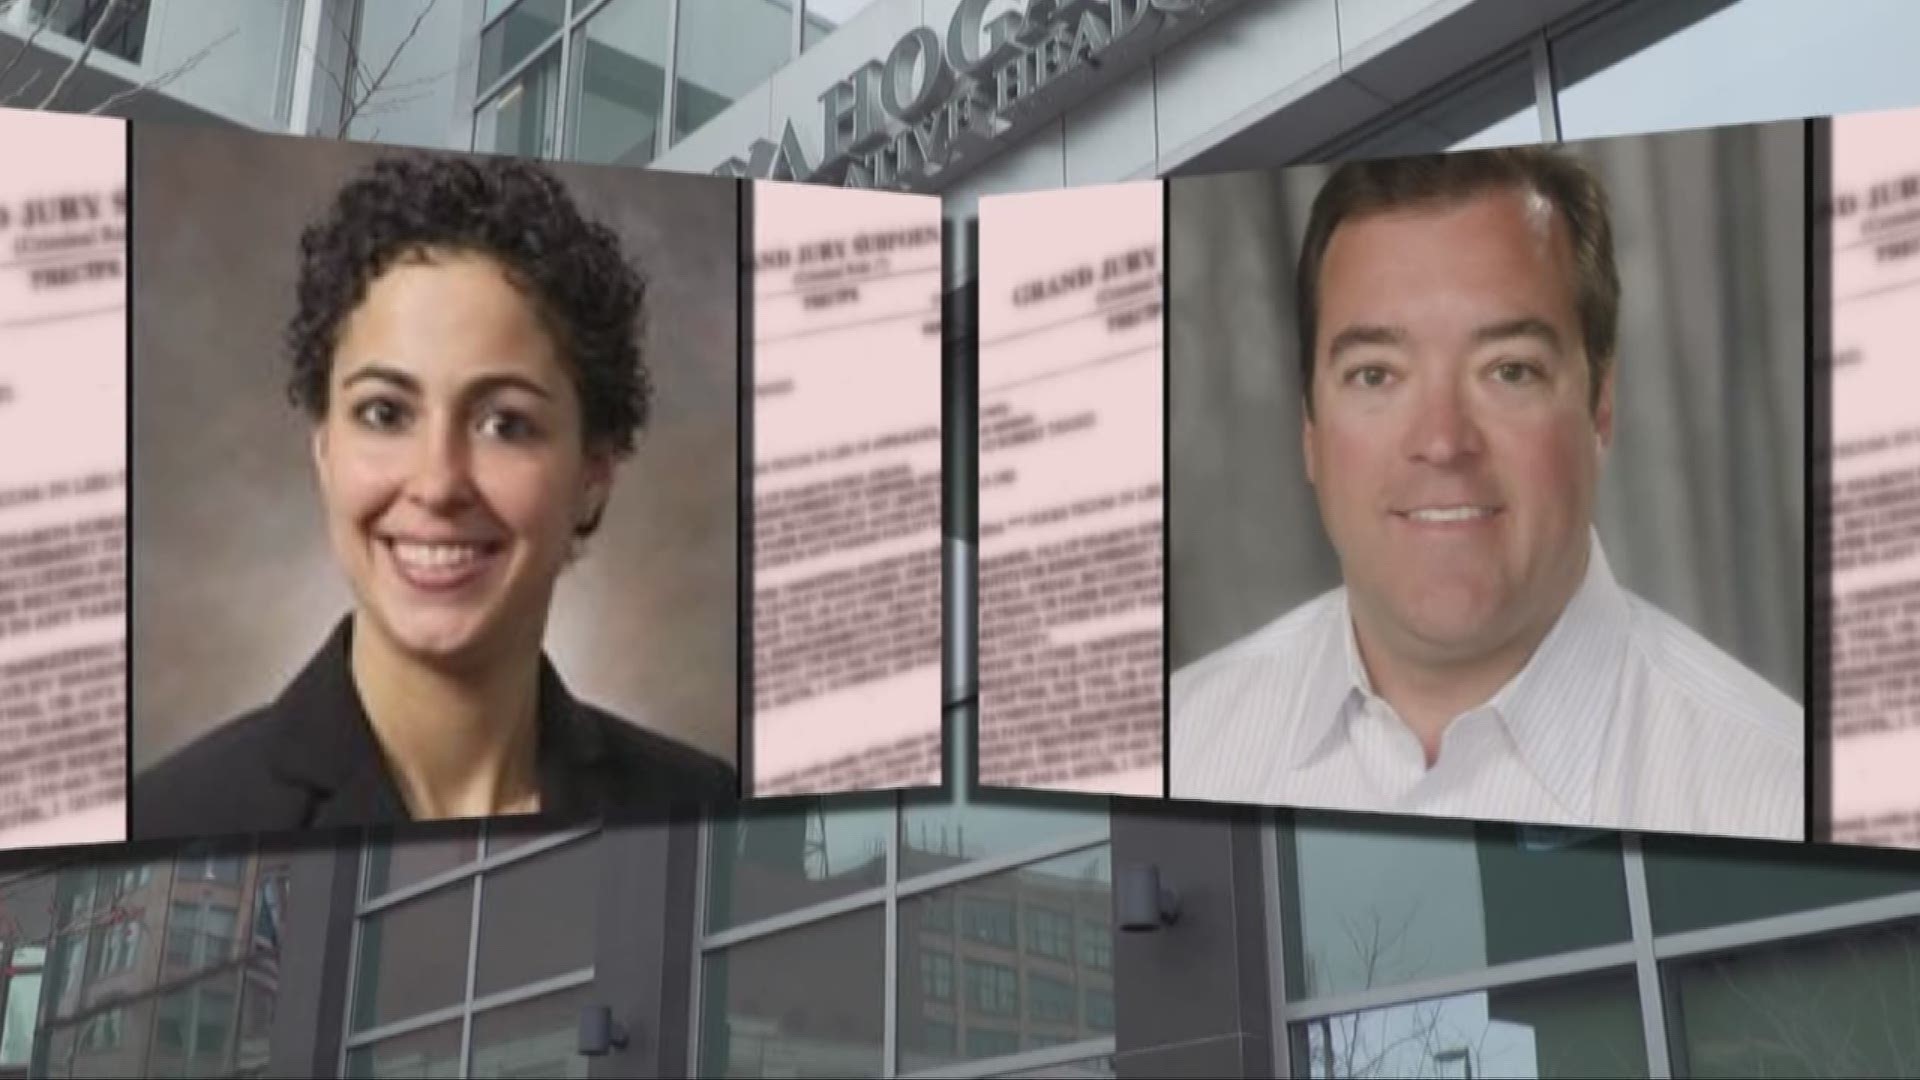 Two works on leave pending cuyahoga county corruption investigation 